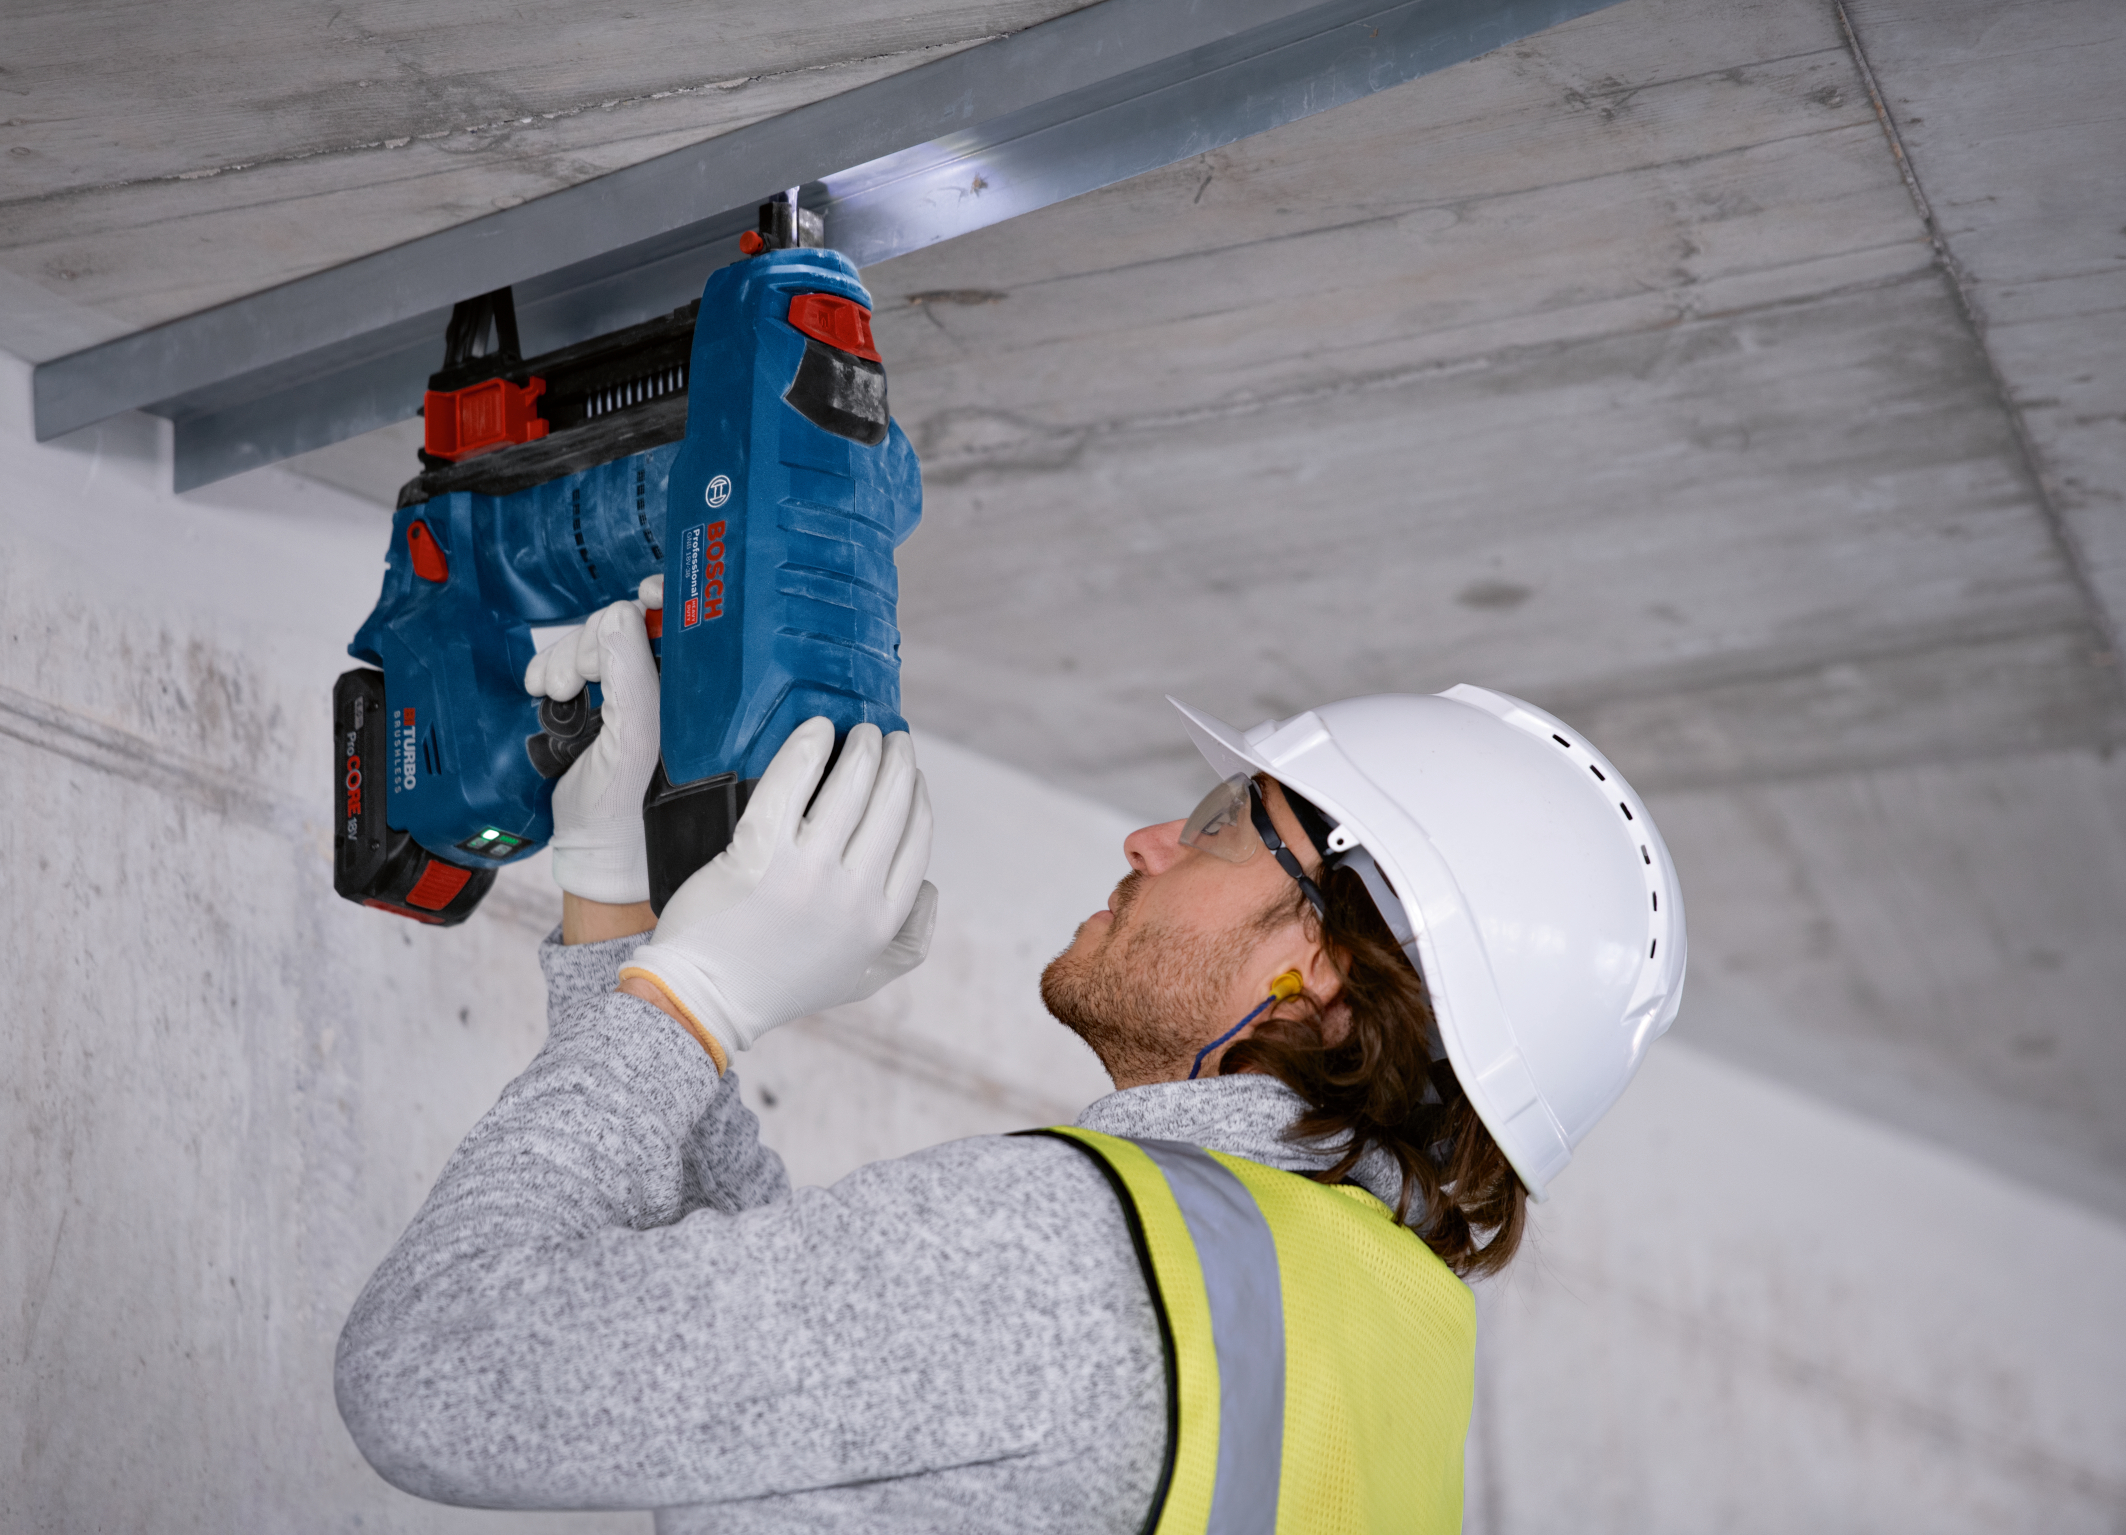 High efficiency meets high user protection: First professional cordless concrete nailer from Bosch